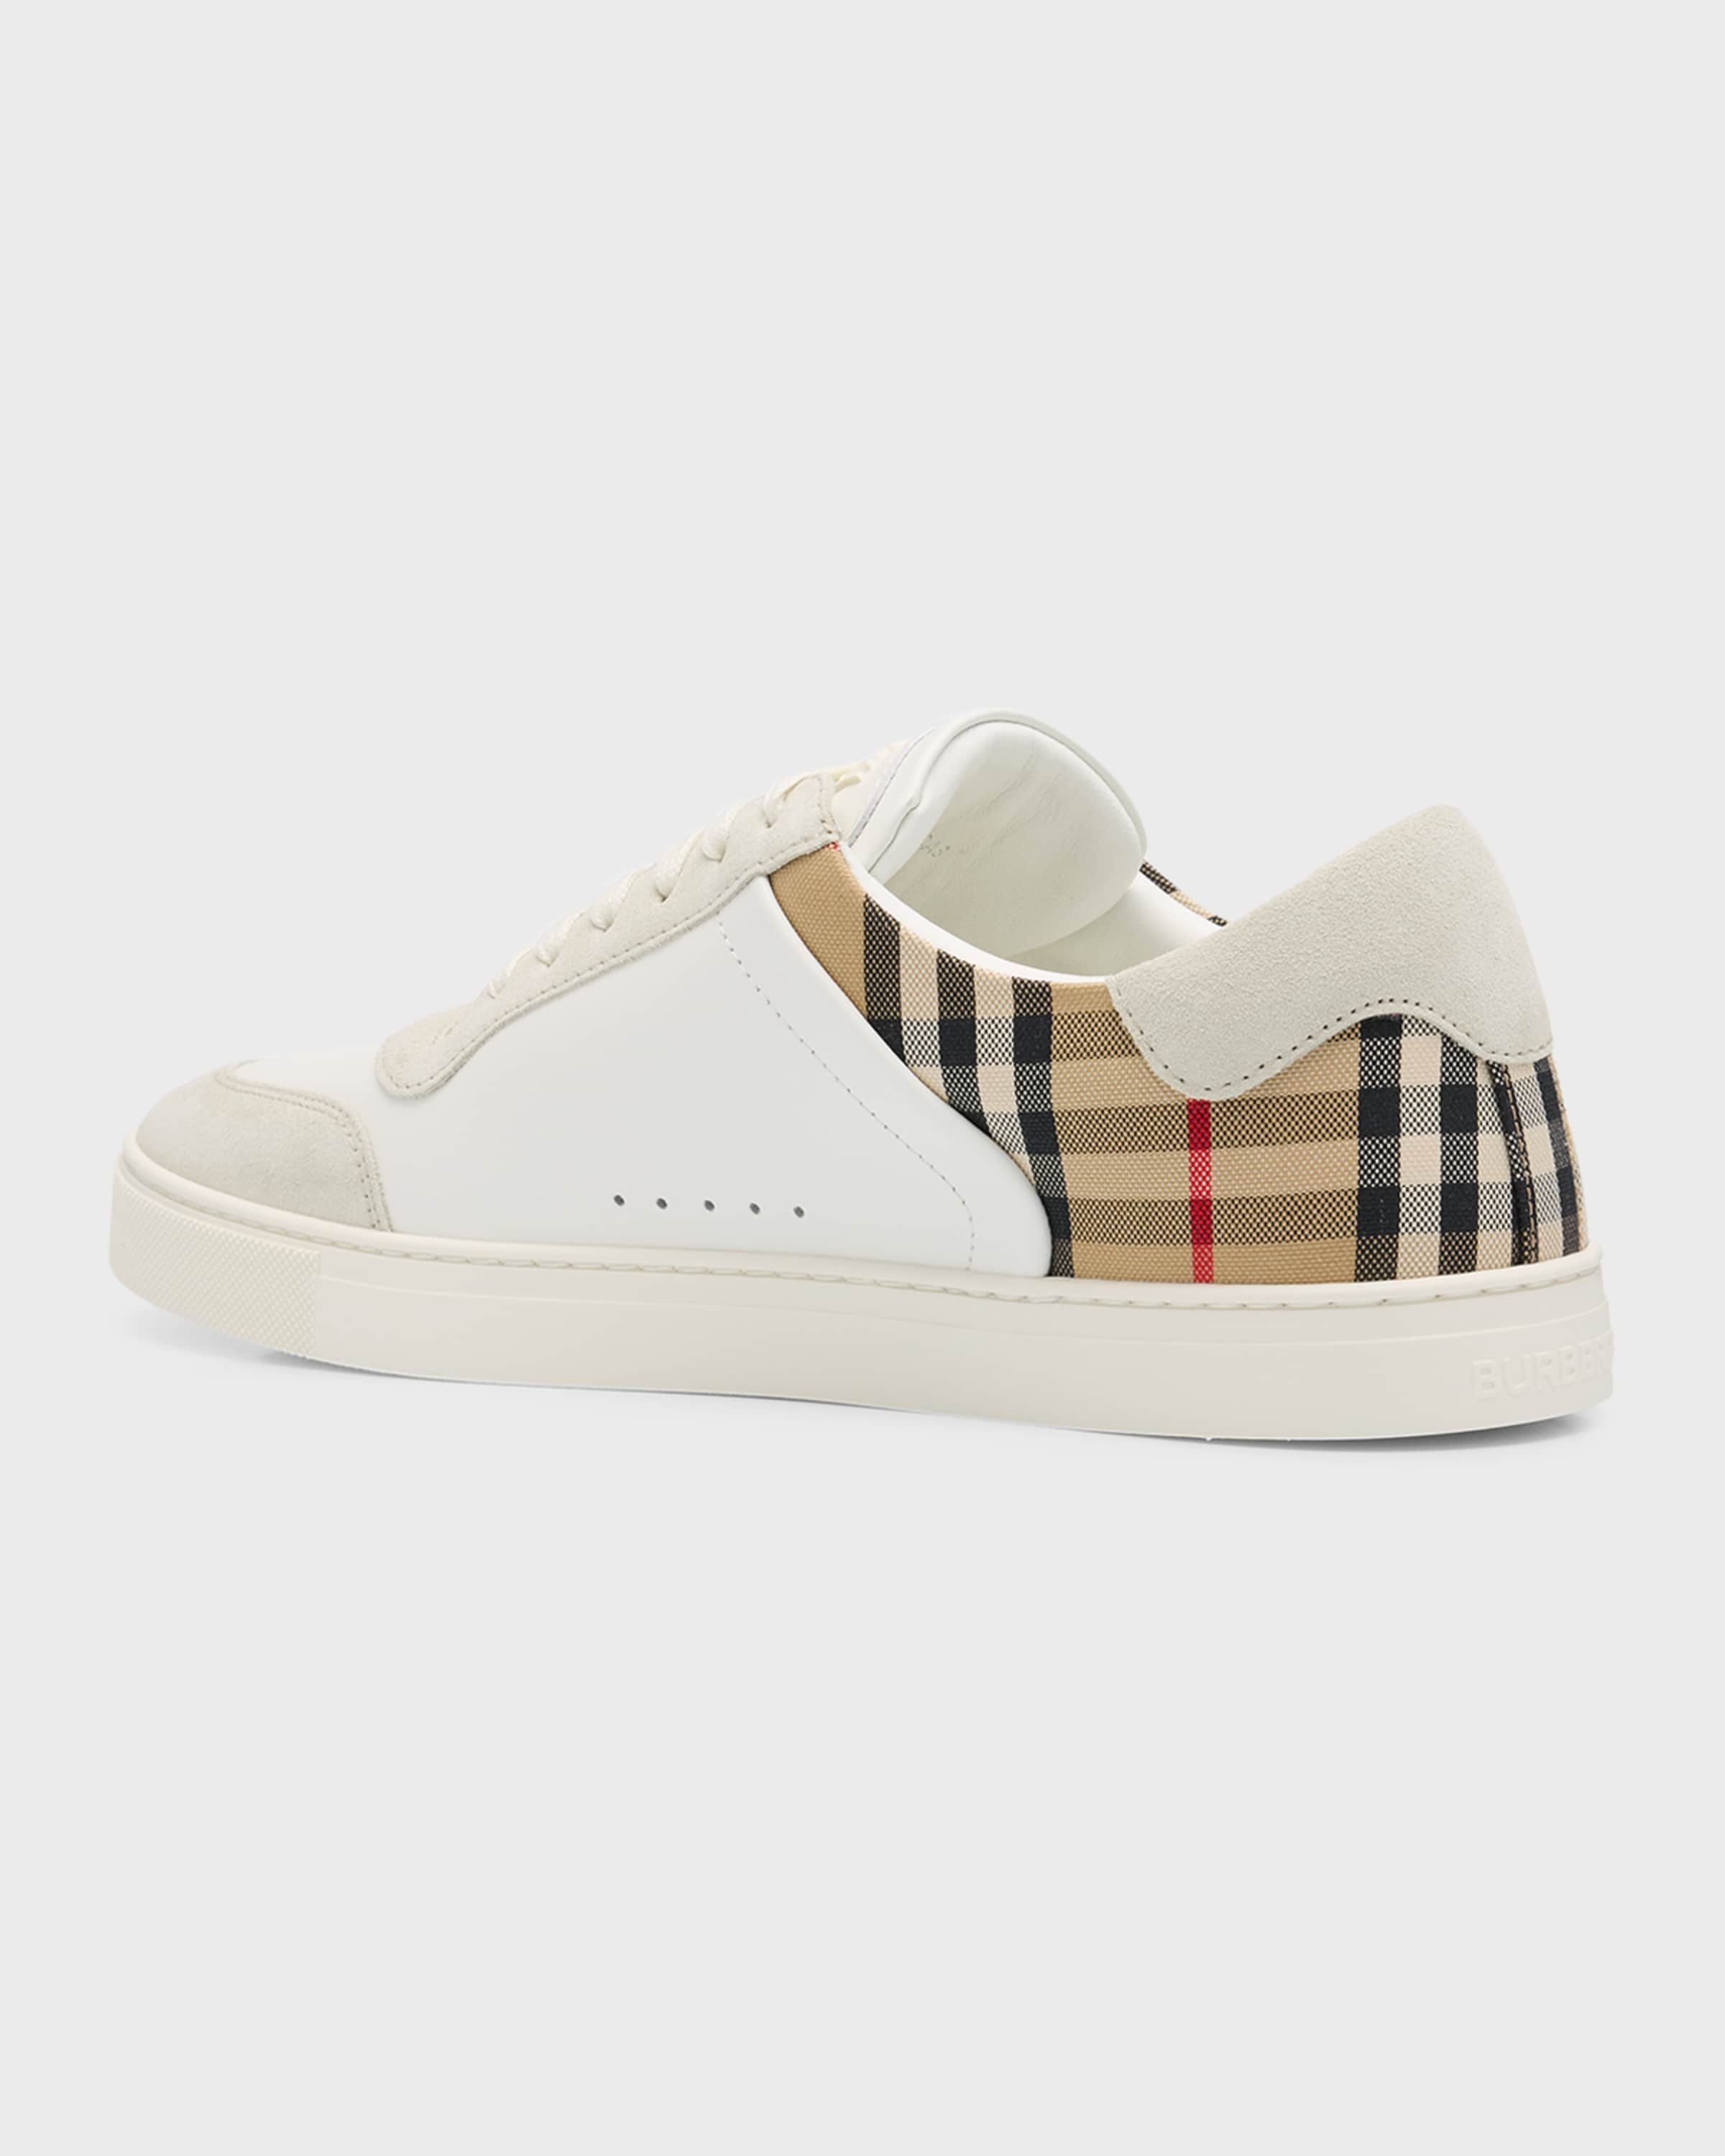 Men's Leather-Suede Check Sneakers - 4